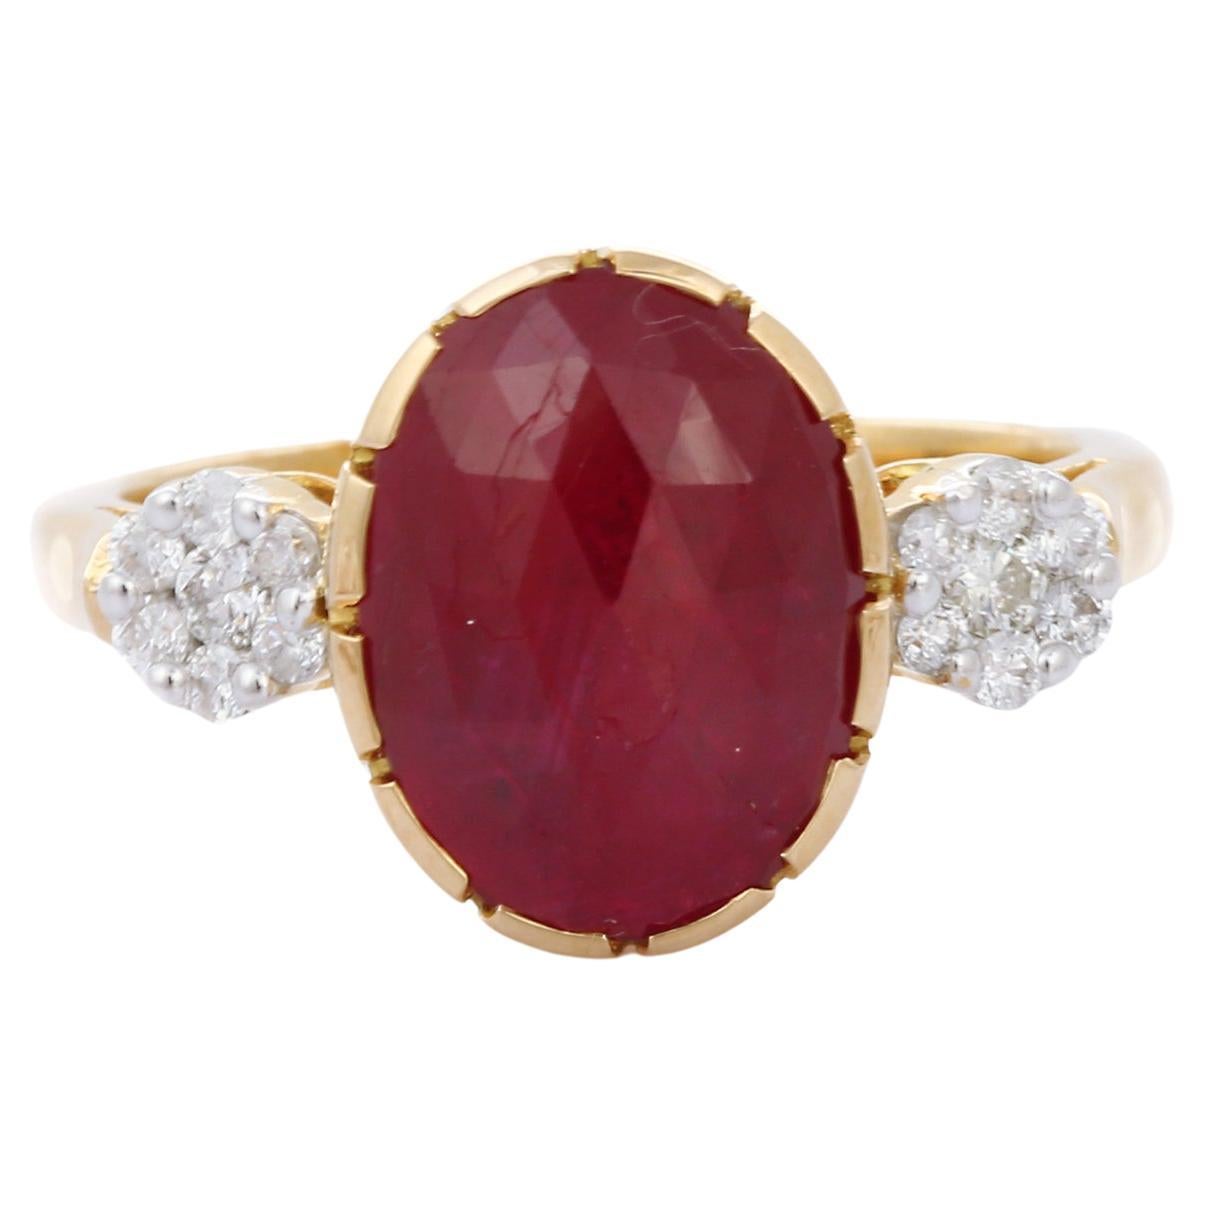 For Sale:  2.92 Carat Red Ruby and Diamond Engagement Ring in 18K Yellow Gold